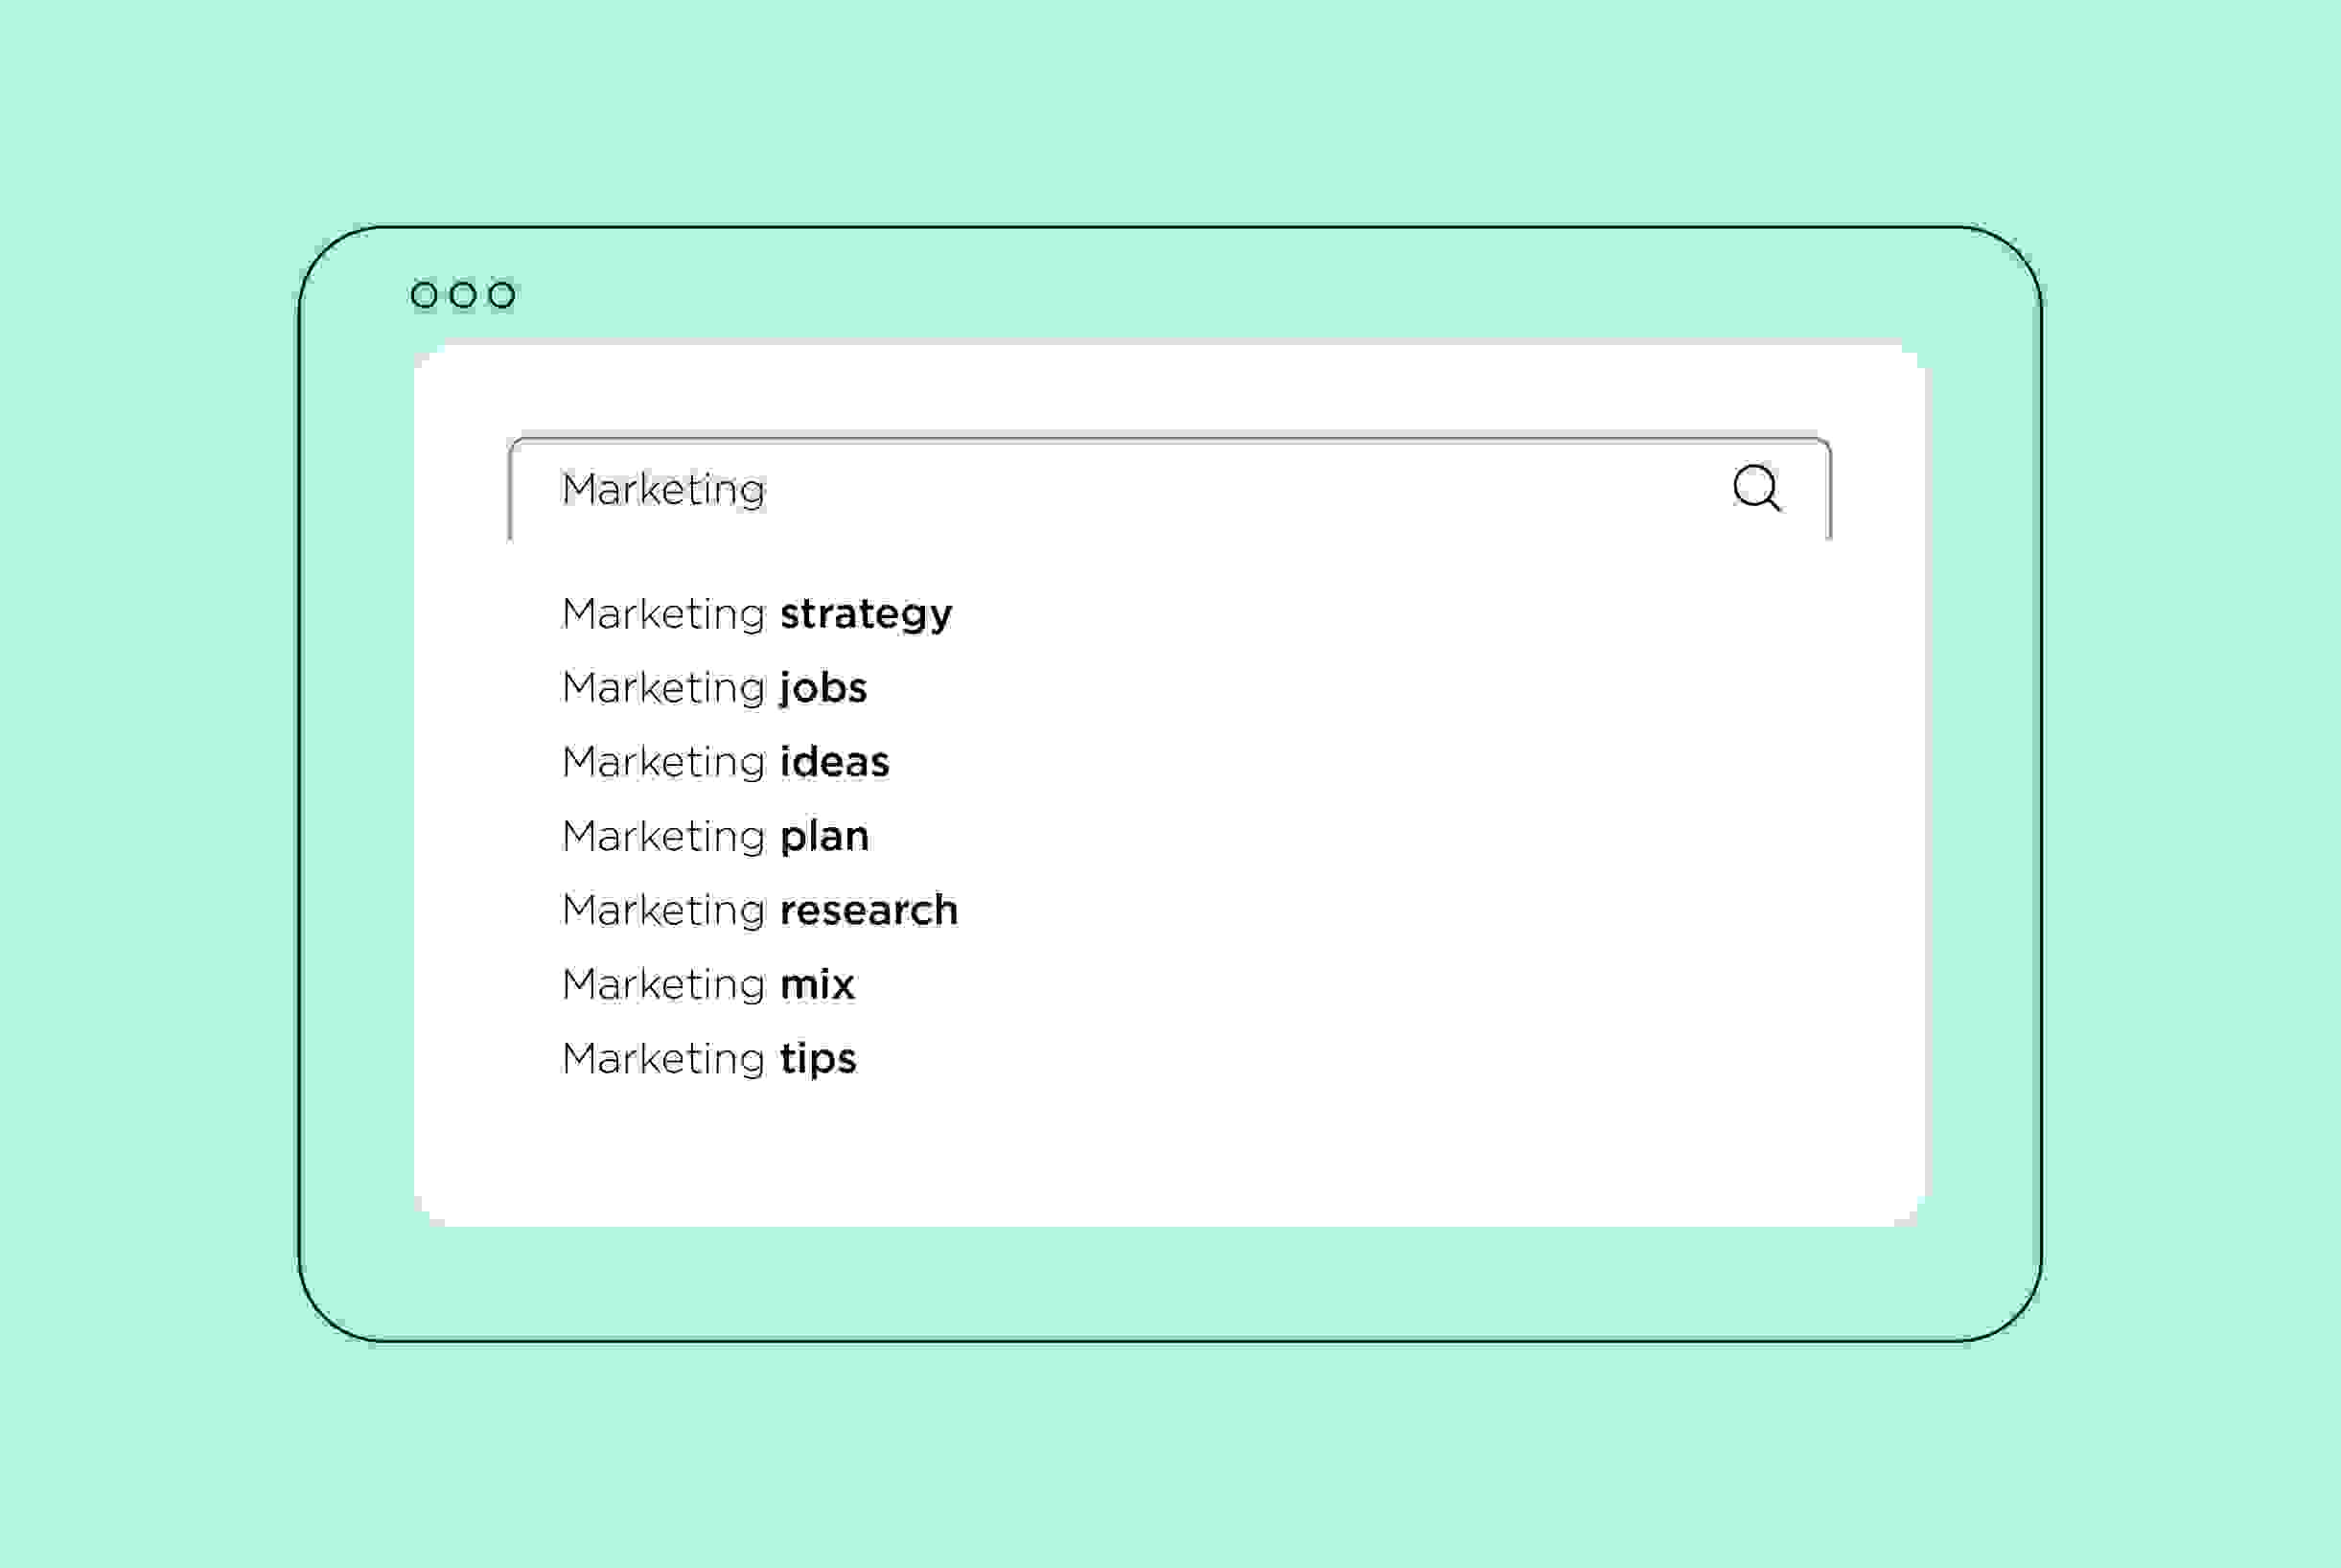 A mock-up of Google search results about marketing